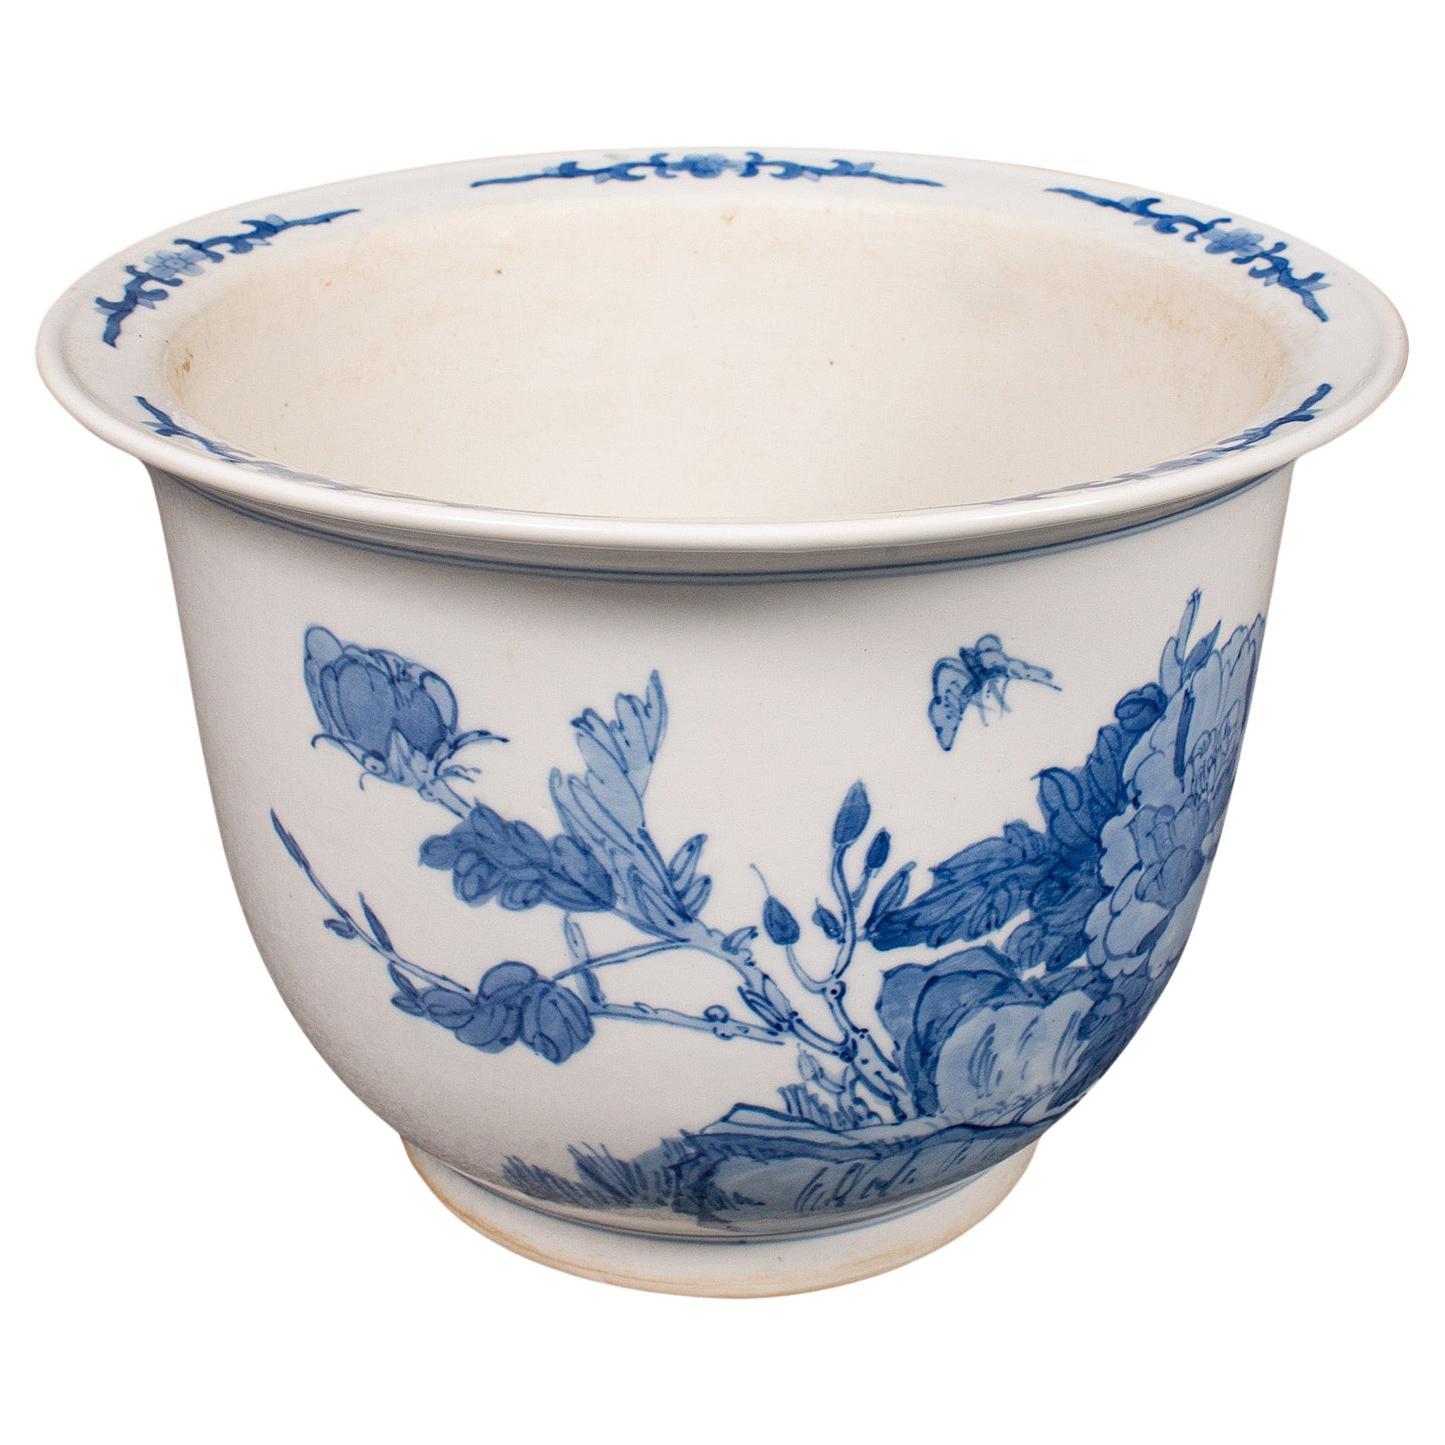 Vintage Decorative Planter, Chinese, Ceramic, Blue and White, Jardiniere, Pot For Sale